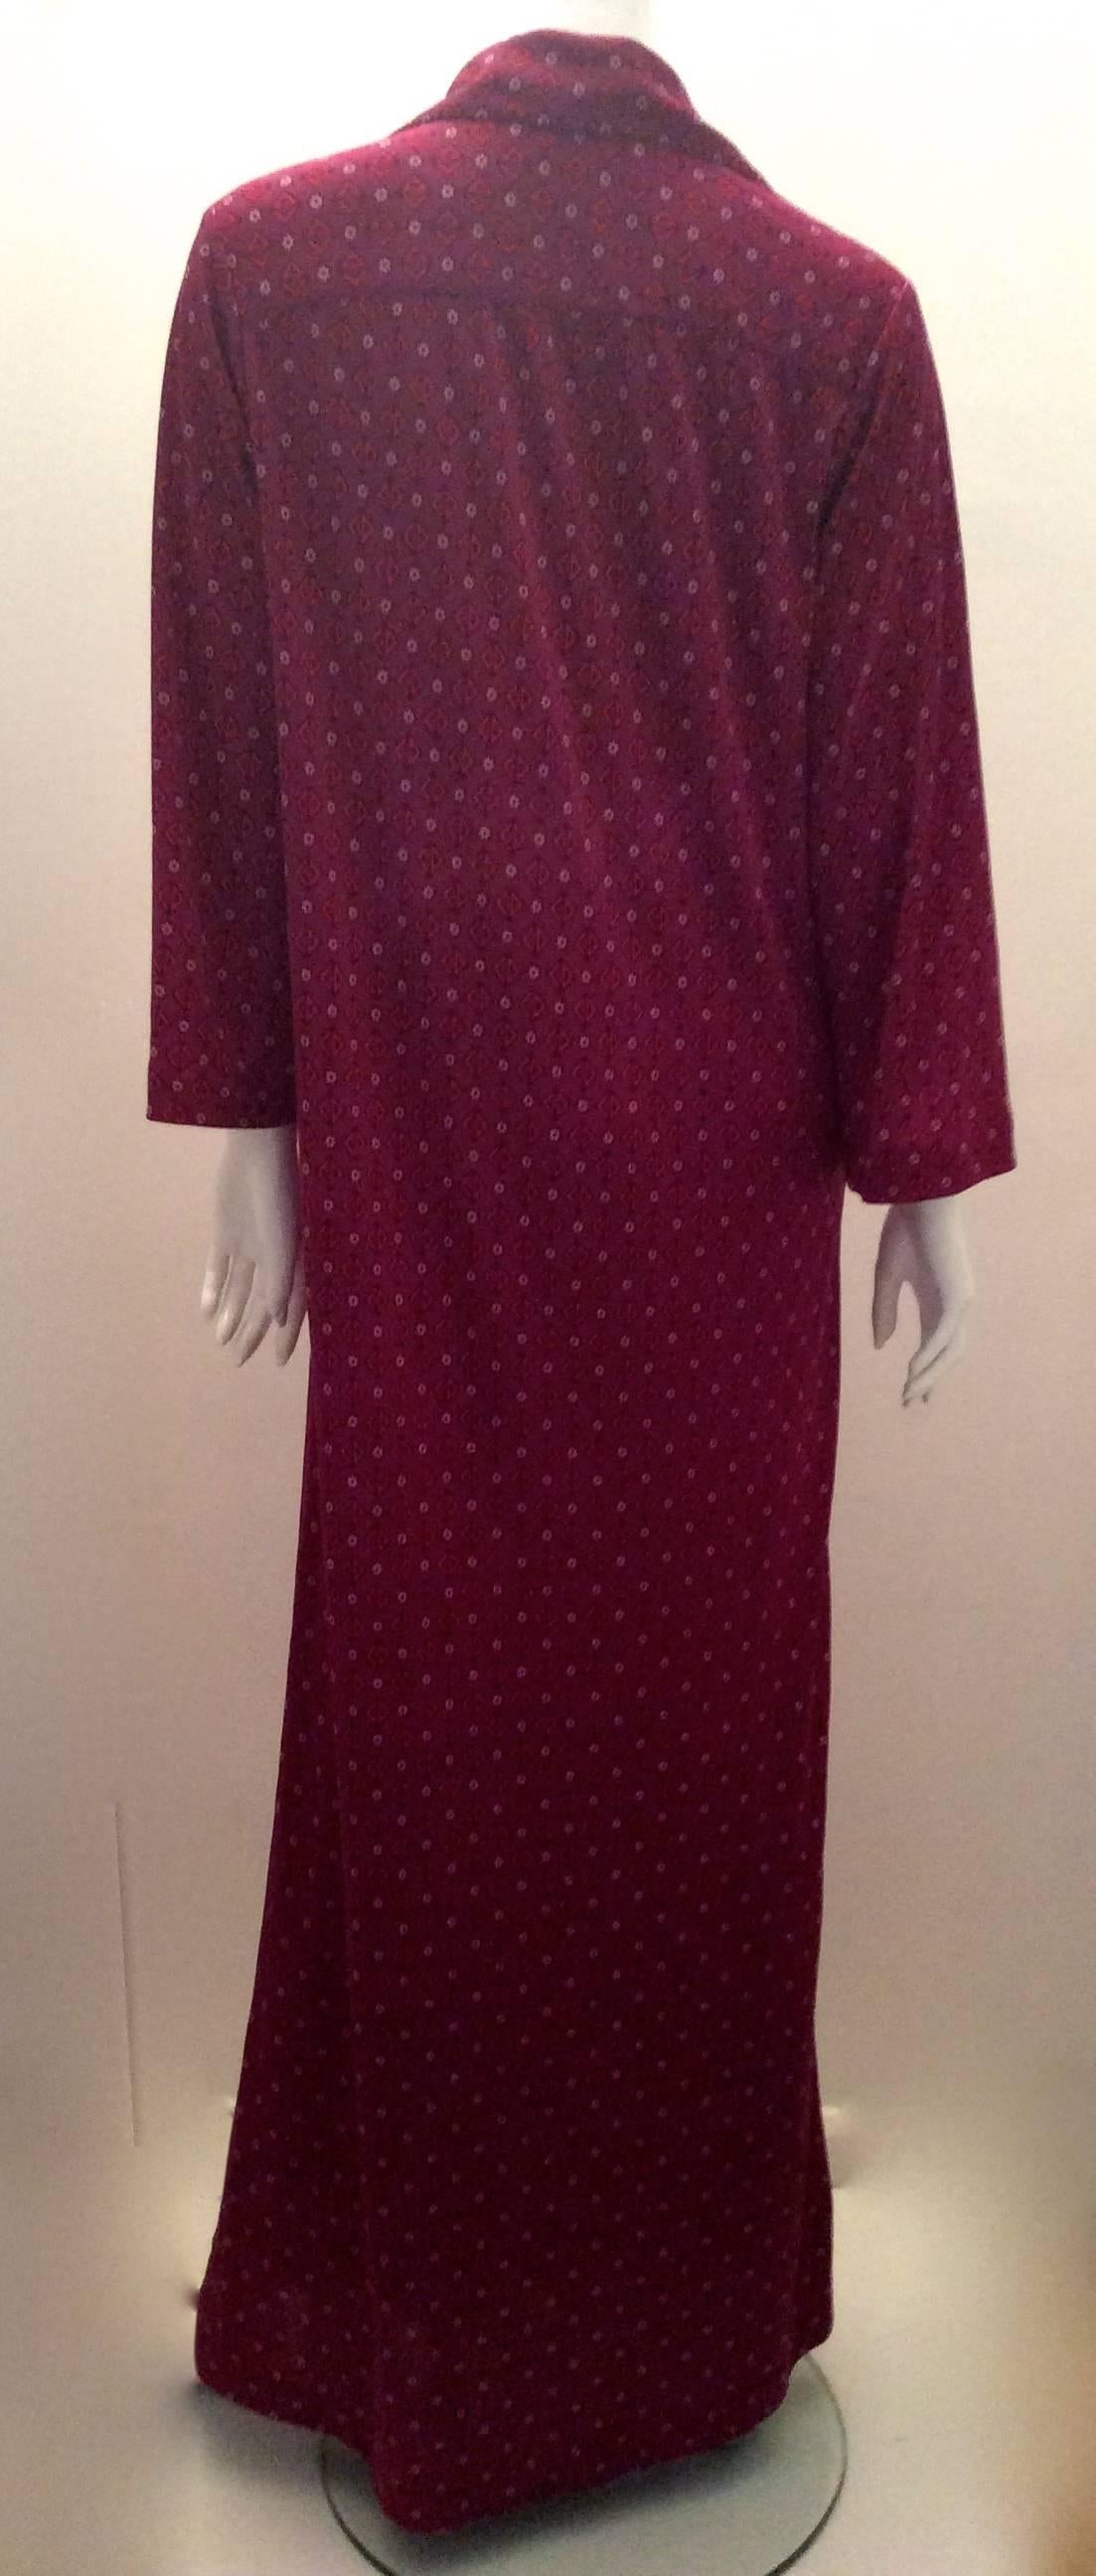 Christian Dior - Miss Dior 1970's Maxi Day Dress In Excellent Condition For Sale In Boca Raton, FL